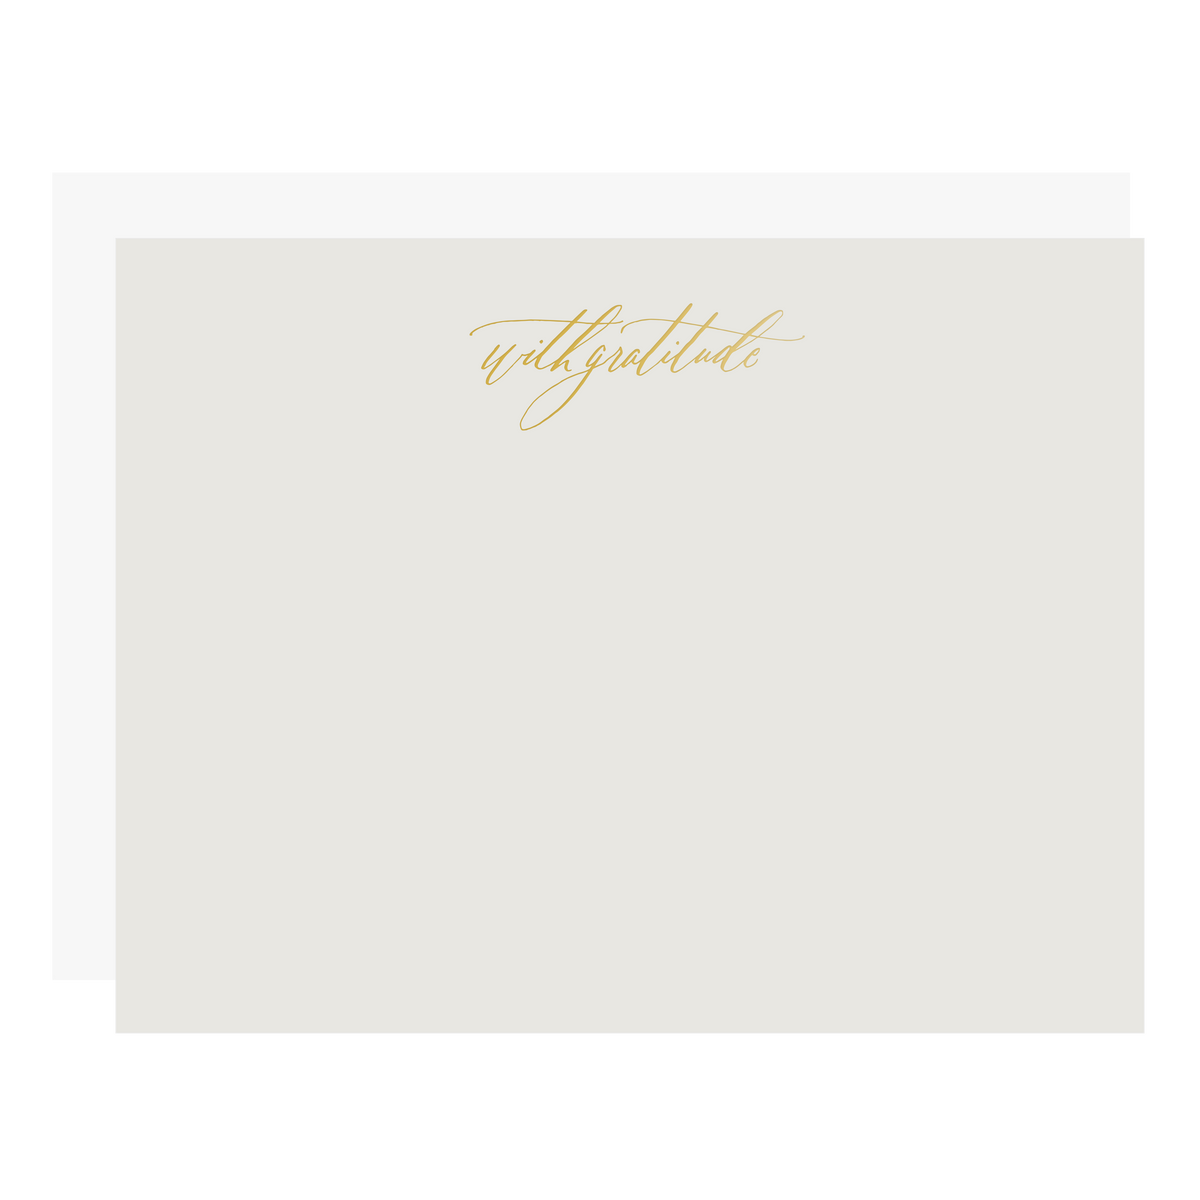 &quot;With Gratitude Flat Boxed Note Set&quot;, letterpress printed by hand in gold foil. 